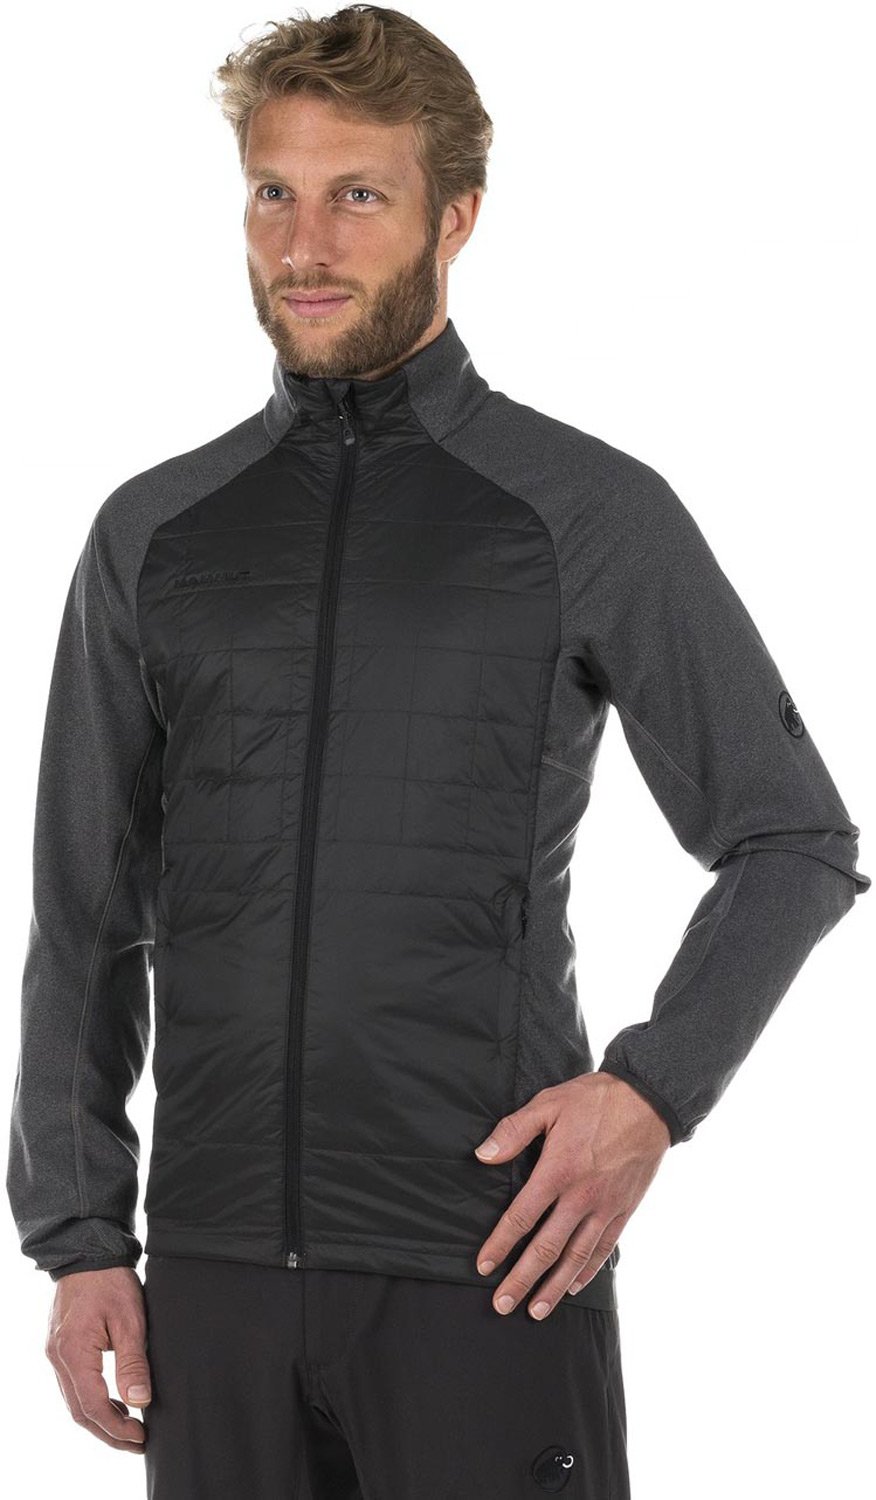 Mammut Aliver Tour IN PrimaLoft Insulated Jacket